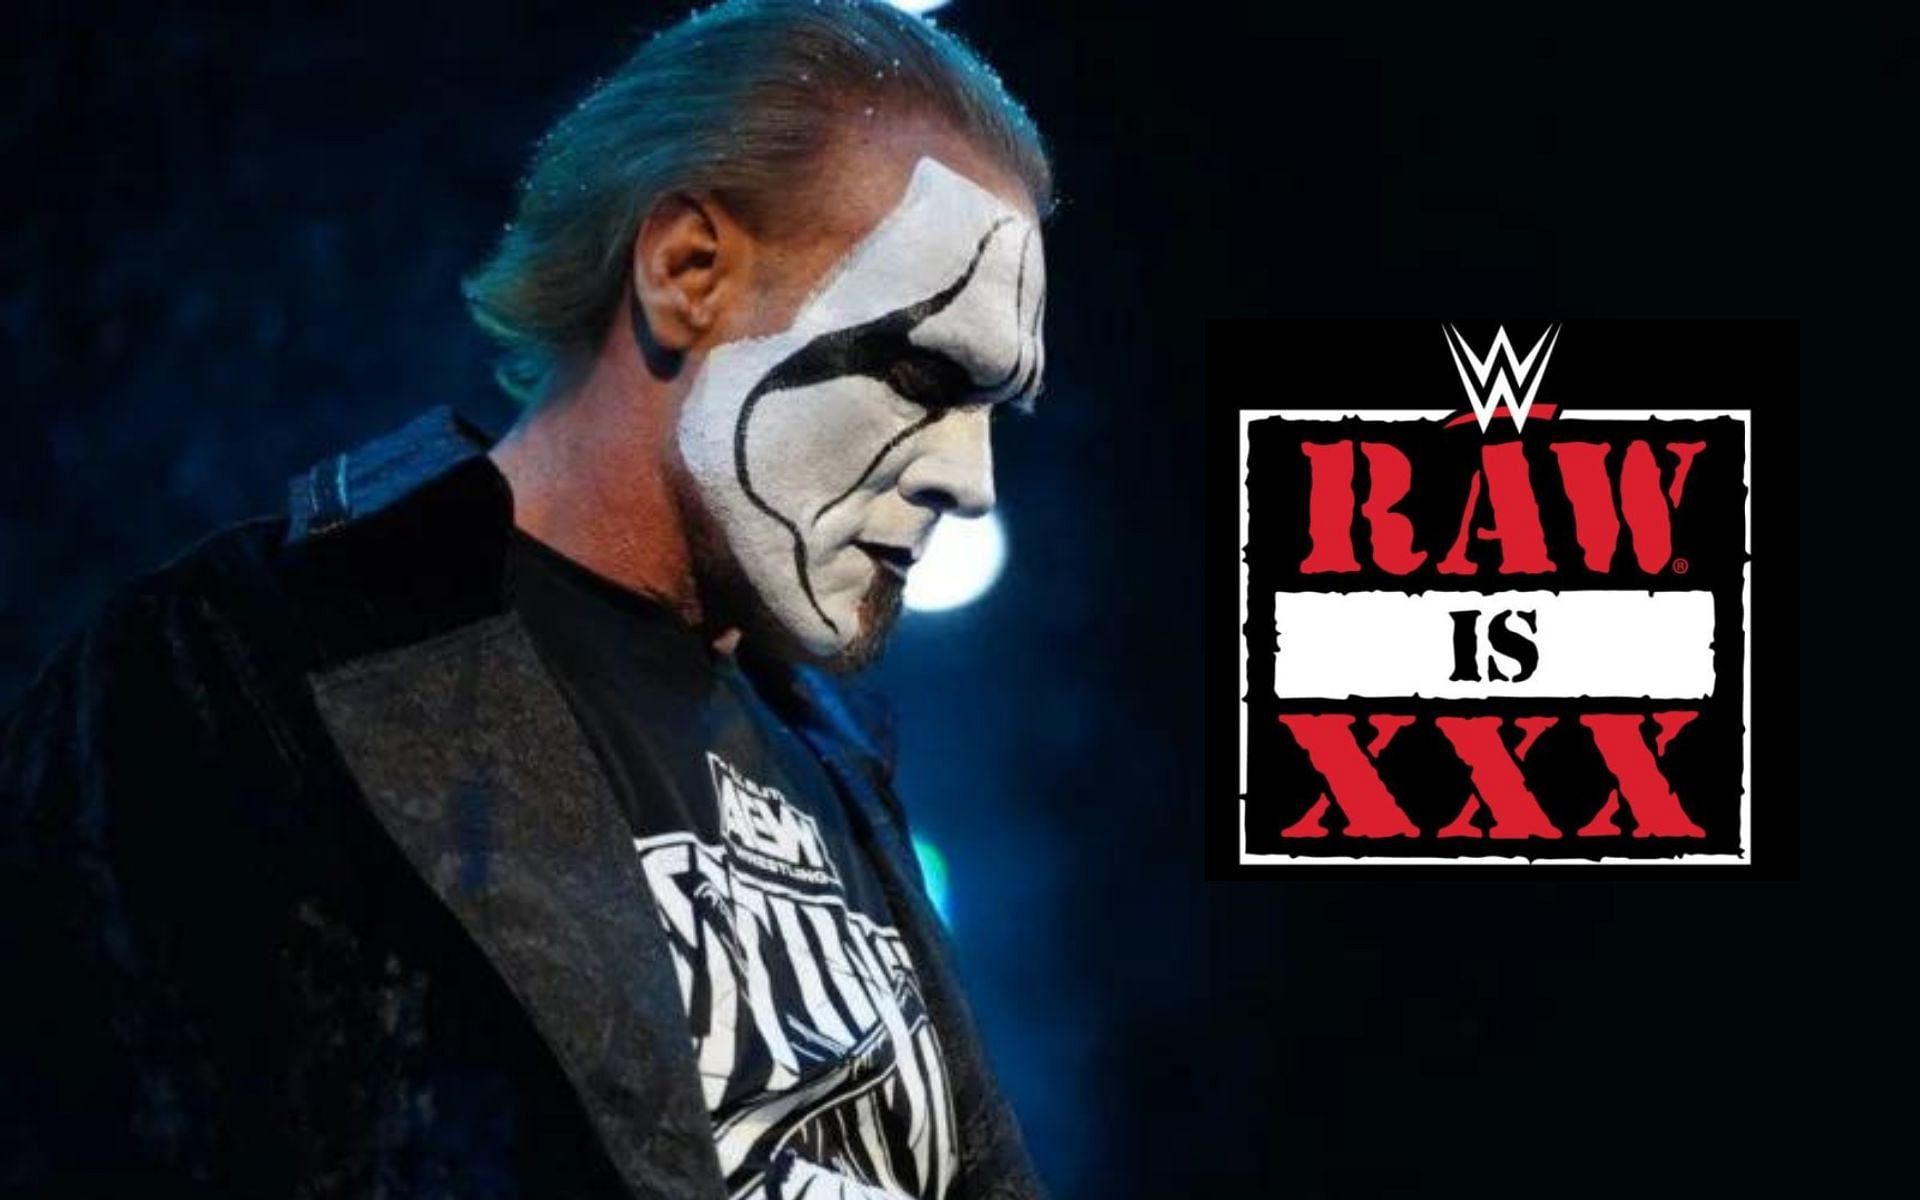 Sting was inducted into the WWE Hall of Fame in 2016